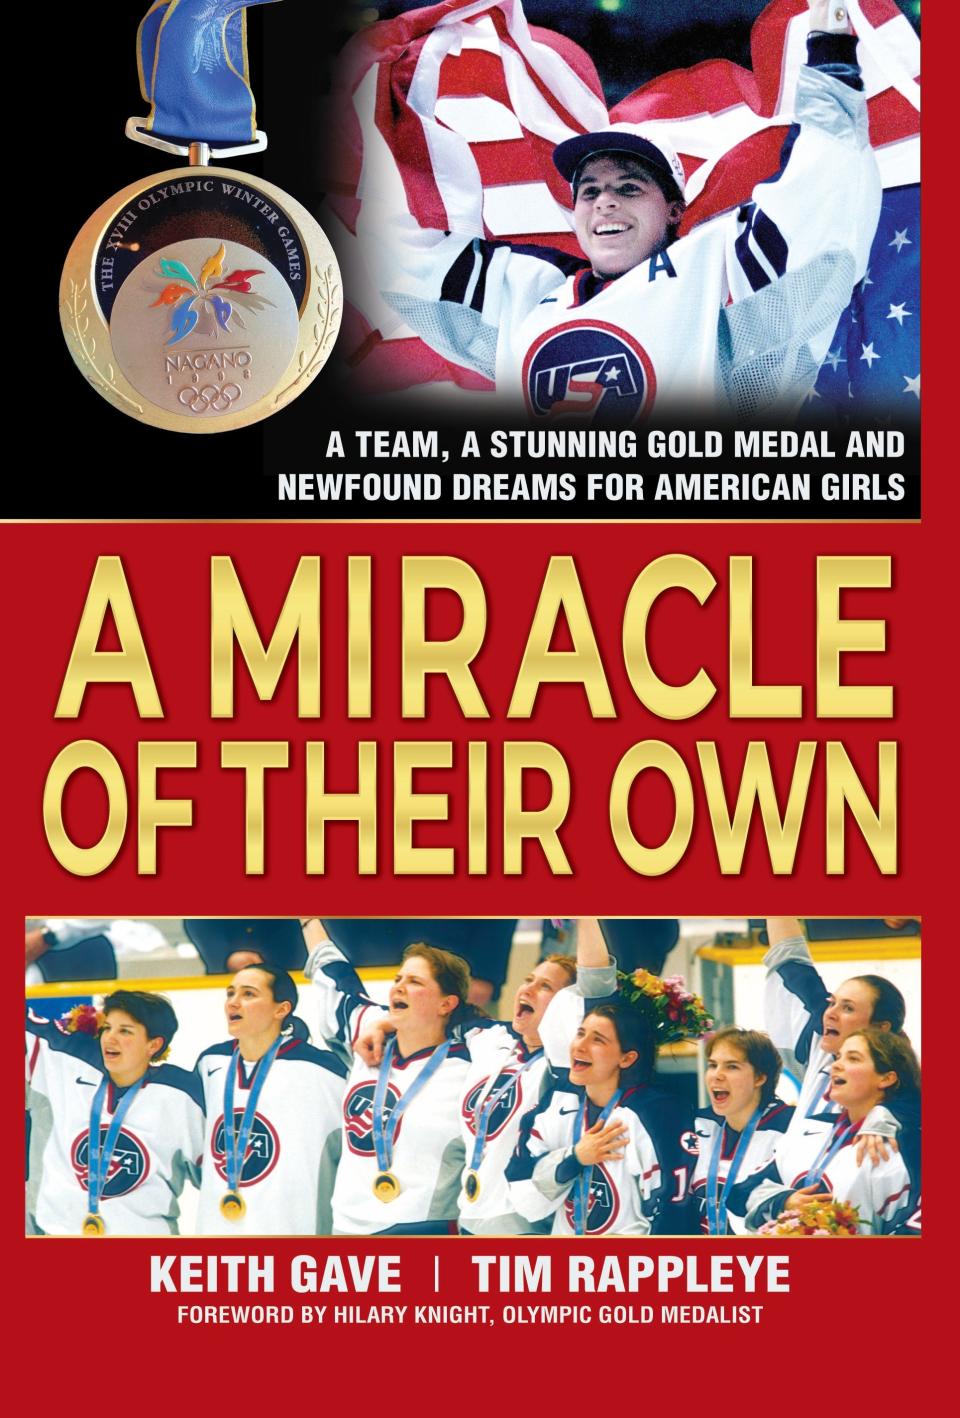 "A Miracle of Their Own" book cover.